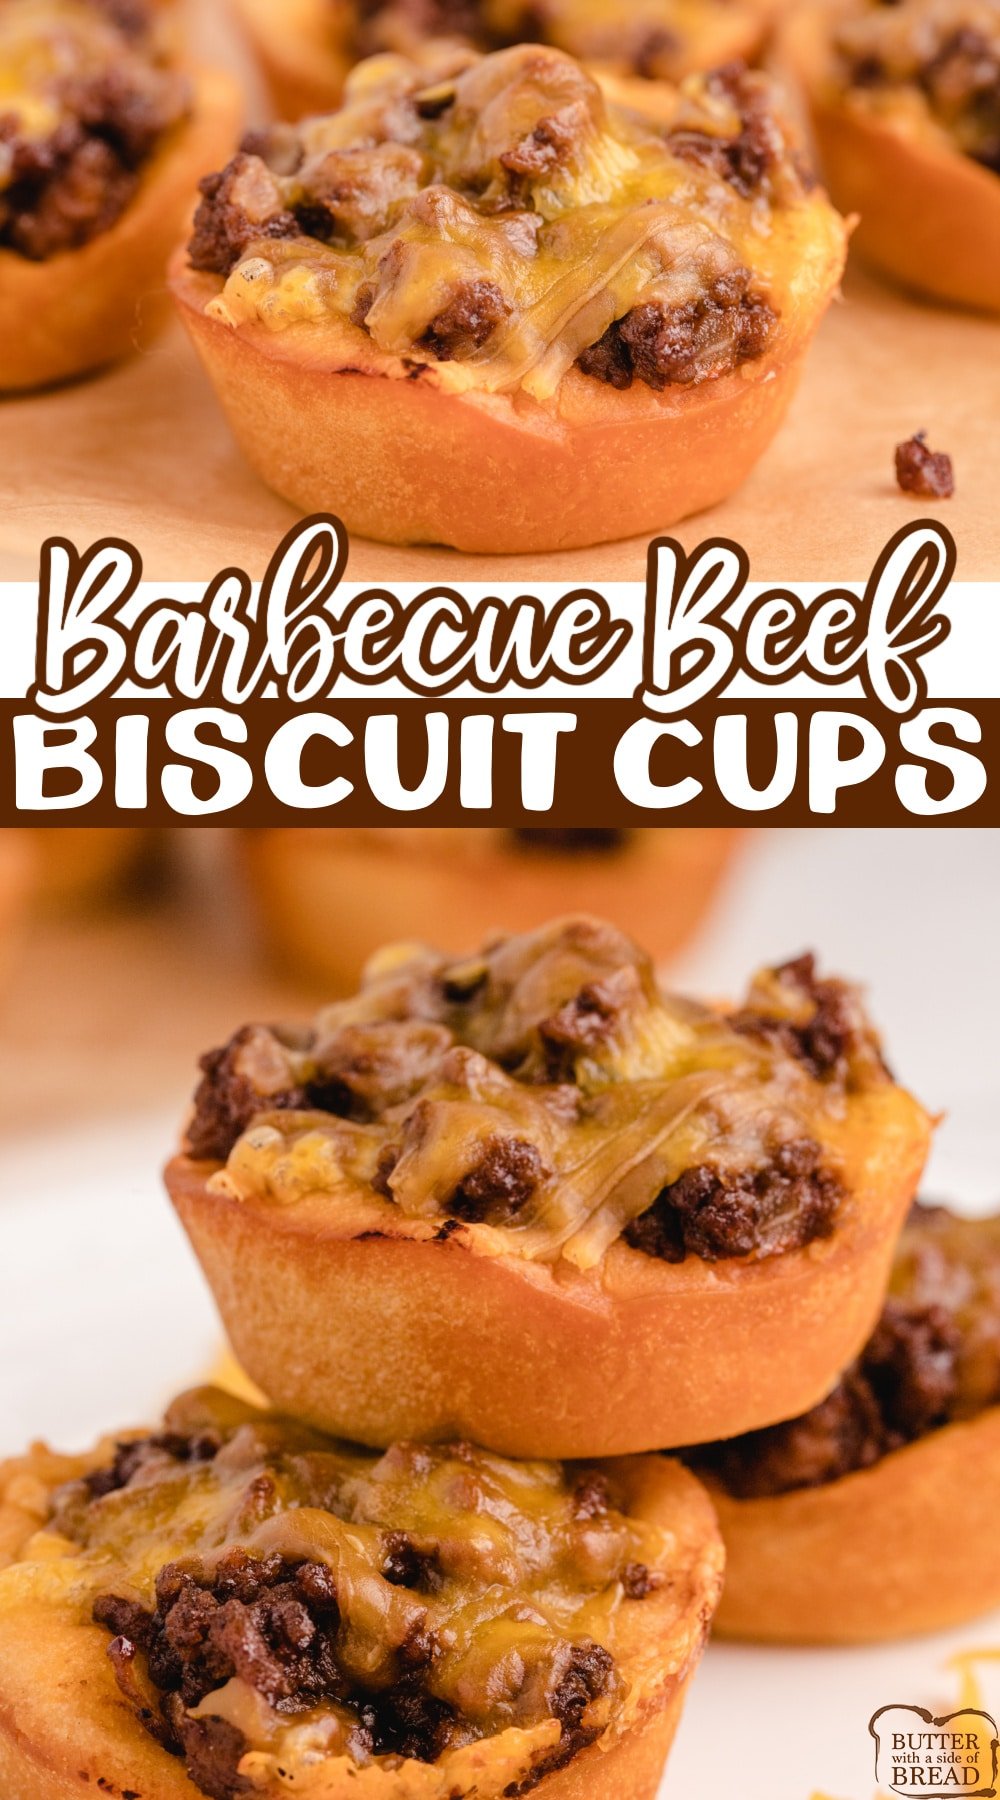 BBQ Beef Biscuit Cups made with cheese, biscuits and ground beef. Only a few simple ingredients to make these as a delicious appetizer recipe or an easy dinner!